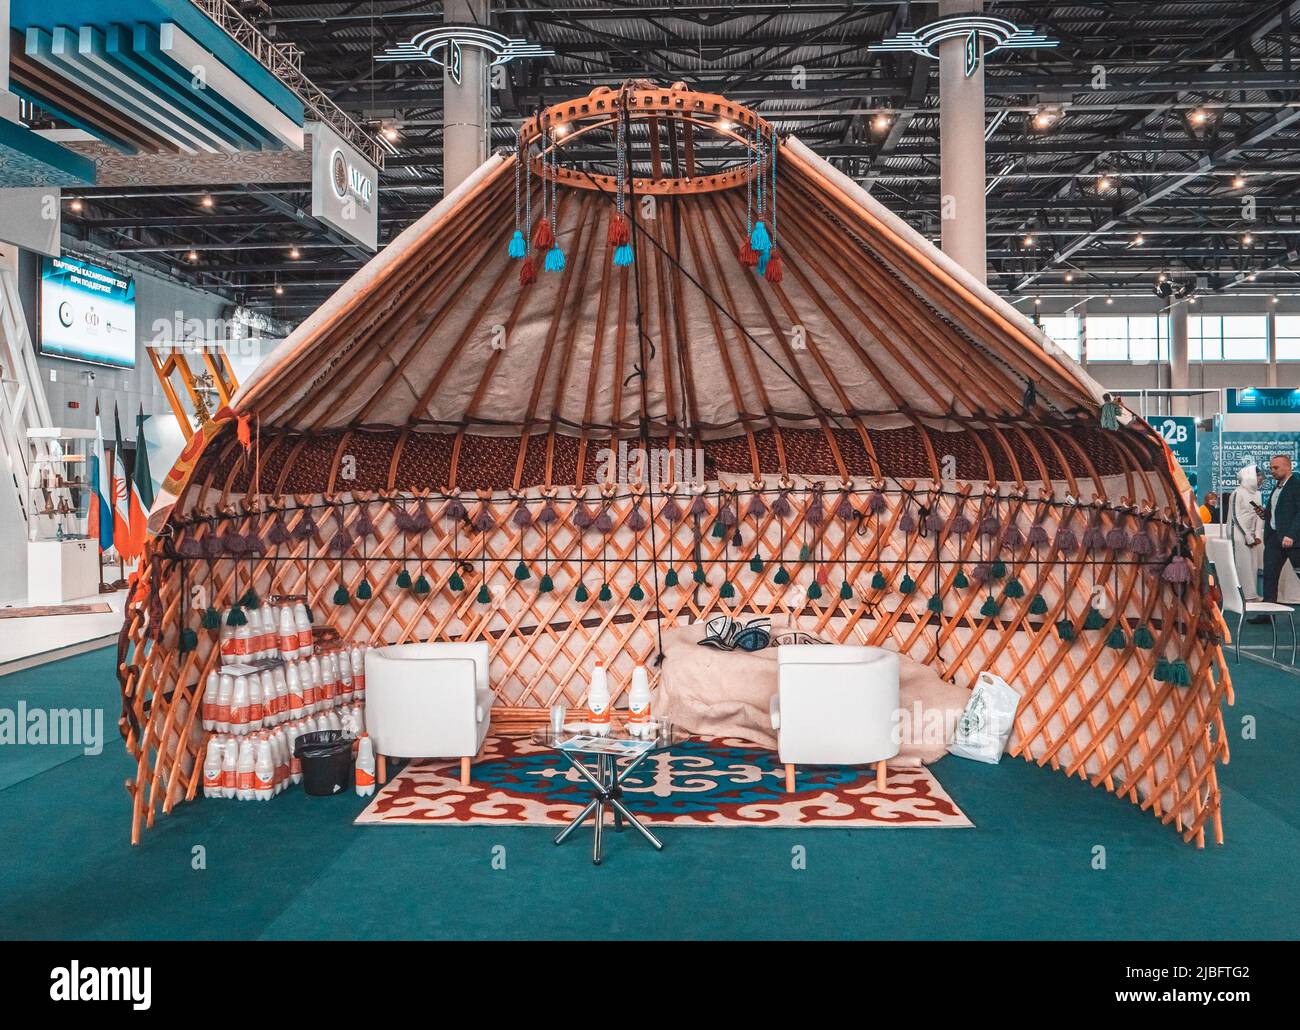 Kazan, Russia. May 19, 2022. Traditional Kazakh yurt in section. Exposition at the exhibition. National Kazakh decorative elements in the yurt. Stock Photo